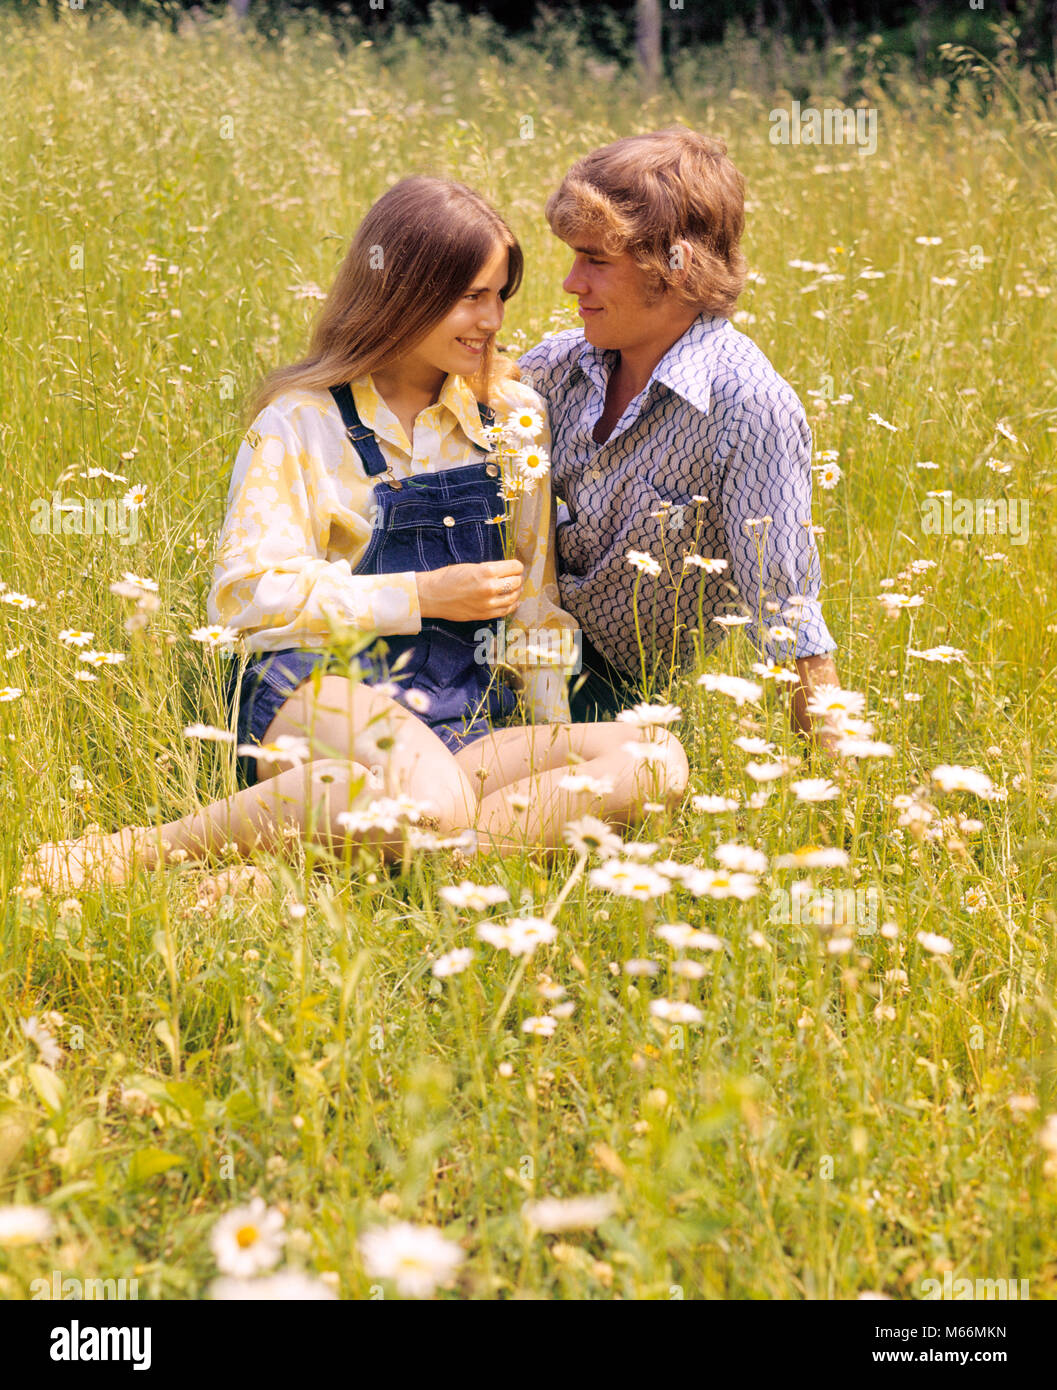 1970s ROMANTIC TEENAGE COUPLE SITTING IN A FIELD OF DAISIES - kj6265 HAR001 HARS PLEASED JOY LIFESTYLE FEMALES RURAL HEALTHINESS NATURE COPY SPACE FRIENDSHIP HALF-LENGTH ADOLESCENT CARING TEENAGE GIRL TEENAGE BOY COUPLES NOSTALGIA TOGETHERNESS SUMMERTIME 13-15 YEARS 16-17 YEARS DATING DAISIES HAPPINESS CHEERFUL LEISURE HAIRSTYLE RELATIONSHIPS SMILES CONNECTION JOYFUL COOPERATION HAIRSTYLES TEENAGED YOUNG LOVE JUVENILES MALES SPRINGTIME CAUCASIAN ETHNICITY FLOWERS DAISY OLD FASHIONED PERSONS Stock Photo